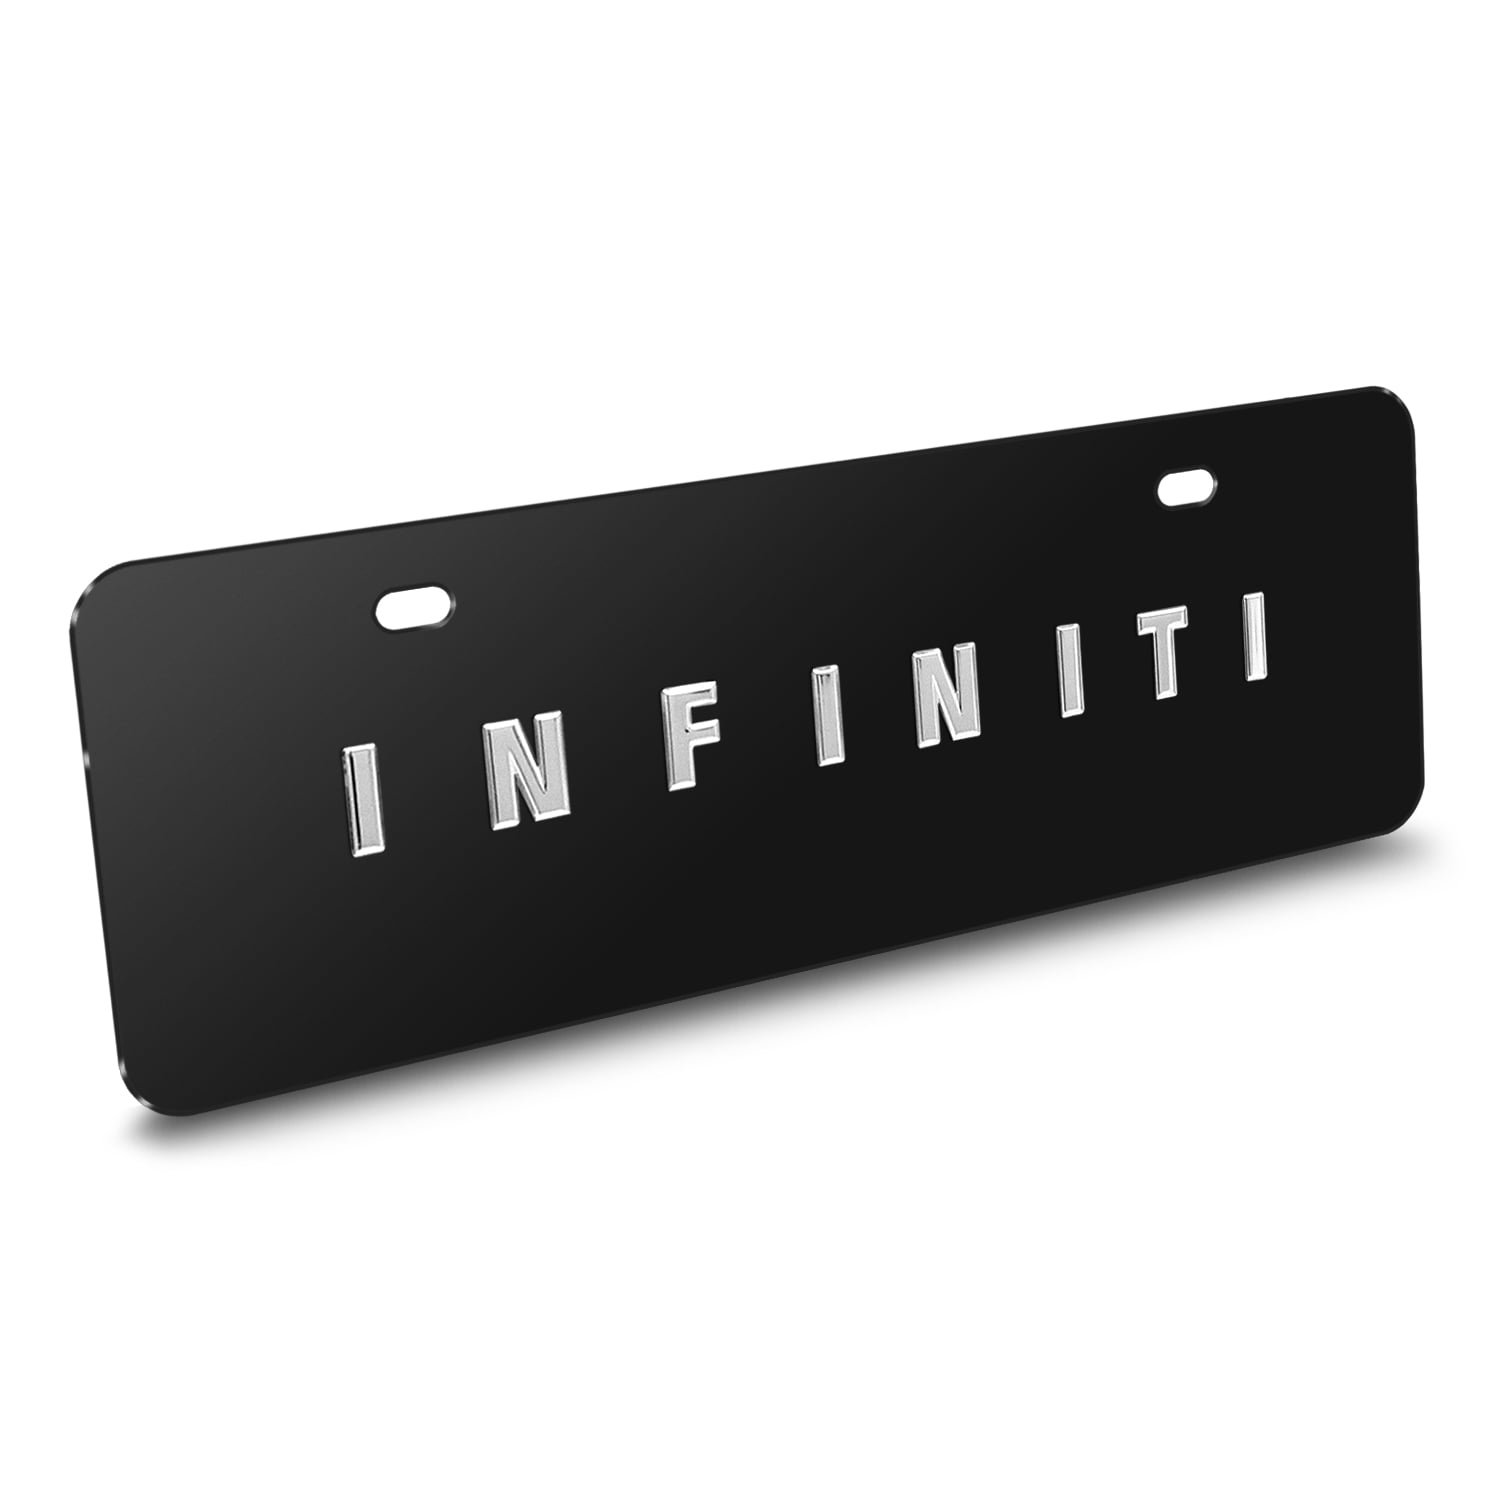 3D Metal tag License Plate Frame for Infiniti,Black Infiniti tag License Cover,Decorate Front License Plate